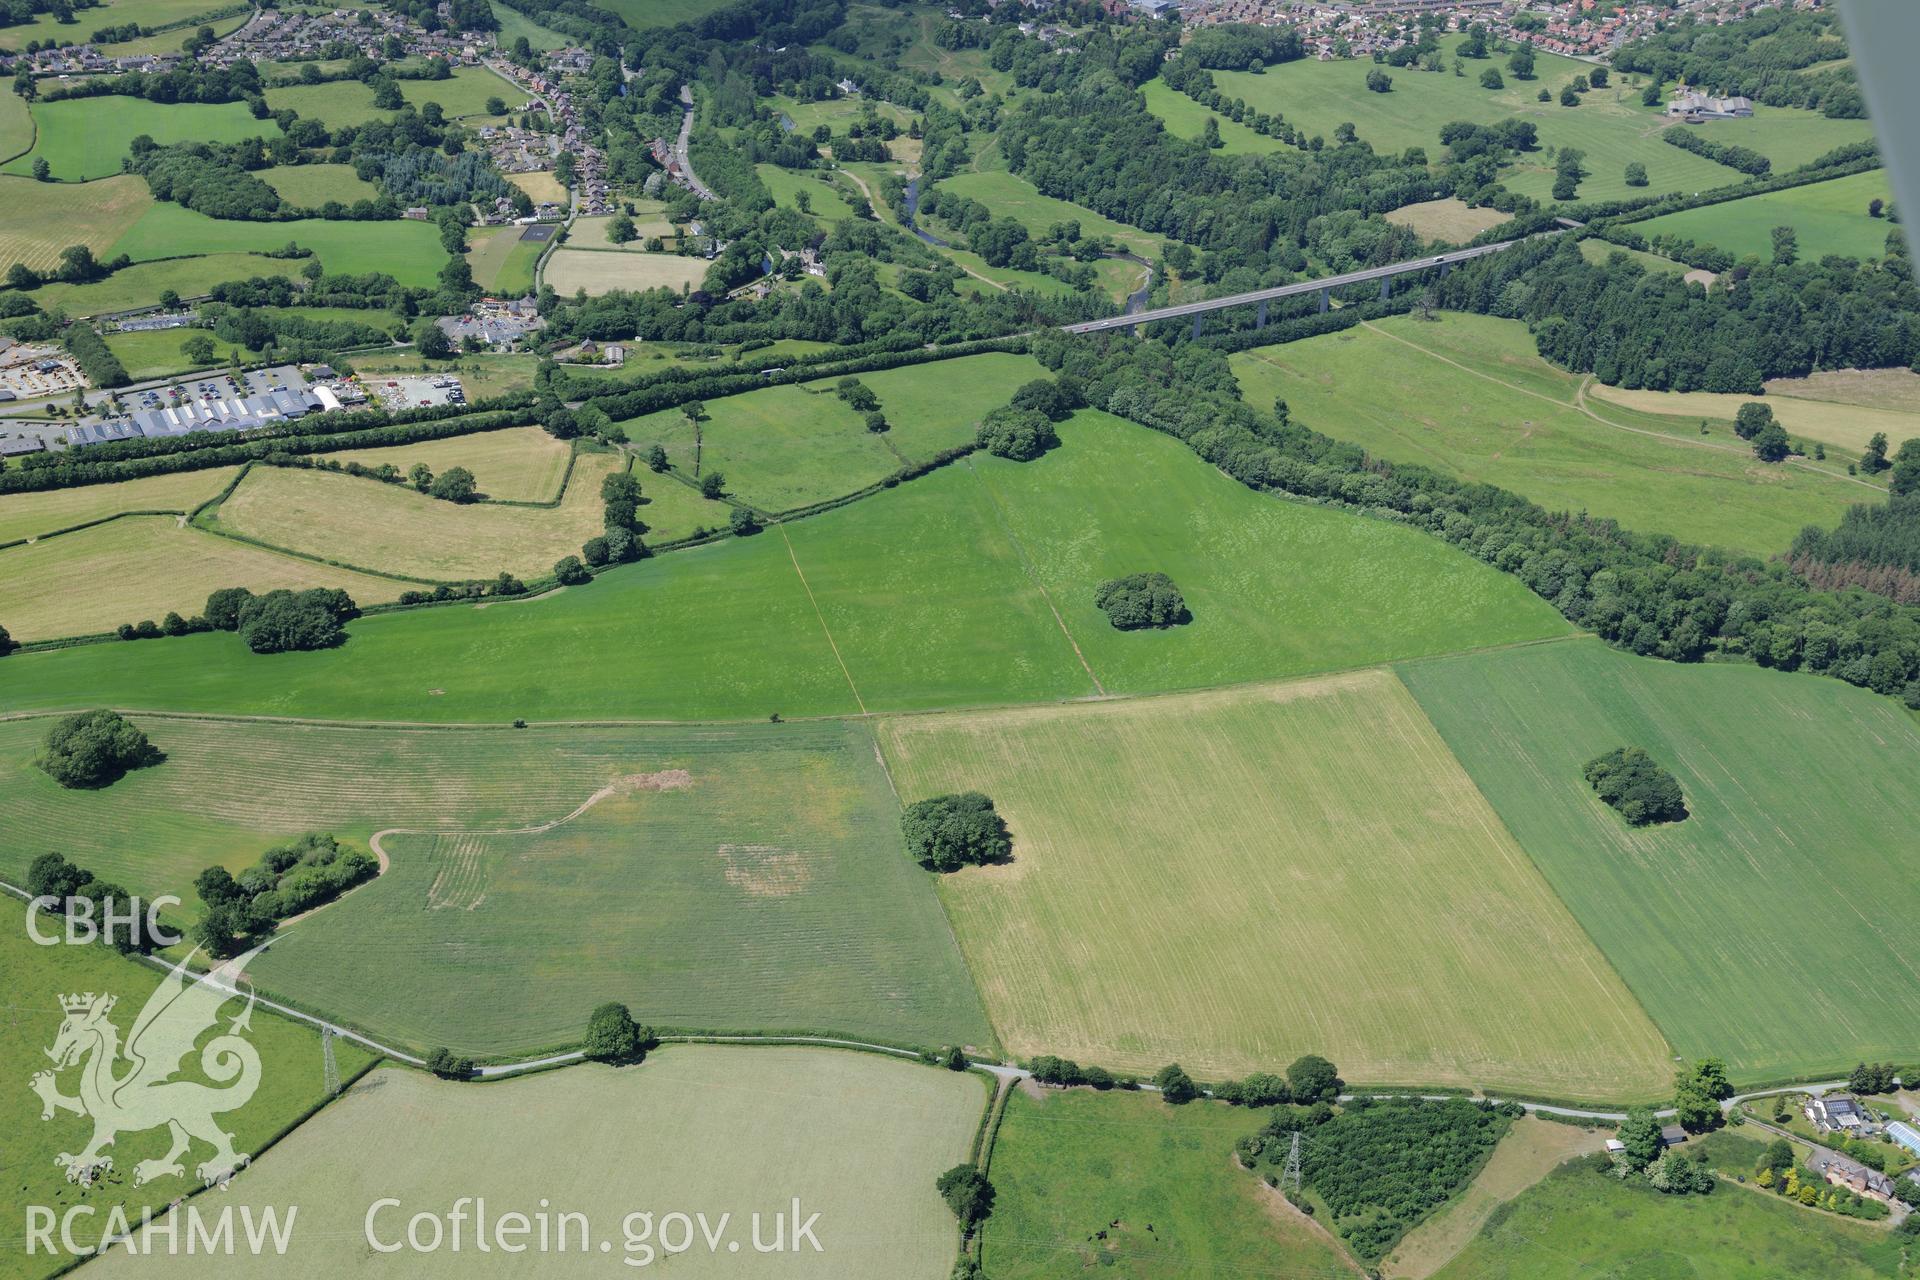 The Ceiriog Viaduct with the town of Chirk beyond. Oblique aerial photograph taken during the Royal Commission's programme of archaeological aerial reconnaissance by Toby Driver on 30th June 2015.